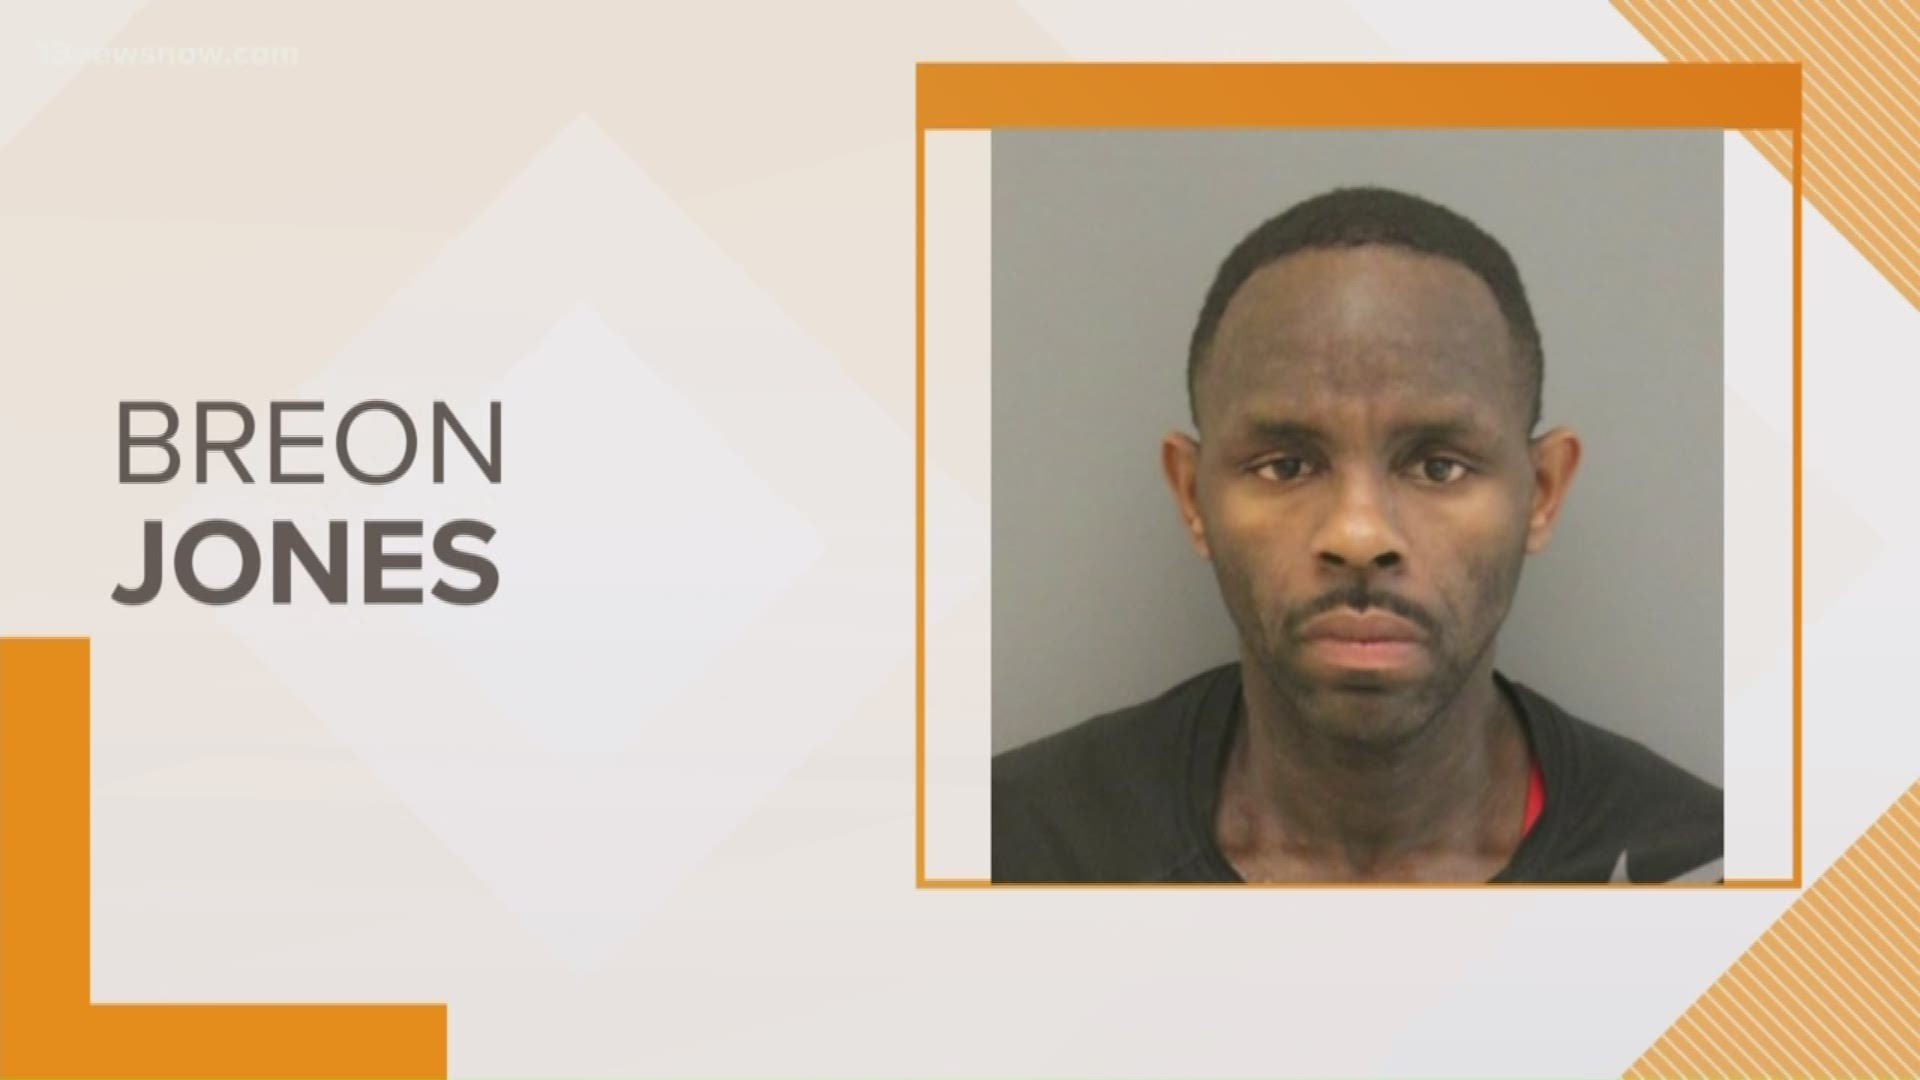 32-year-old Breon Deundre Jones is charged with three counts of indecent liberties with a child and one count of displaying child pornography.